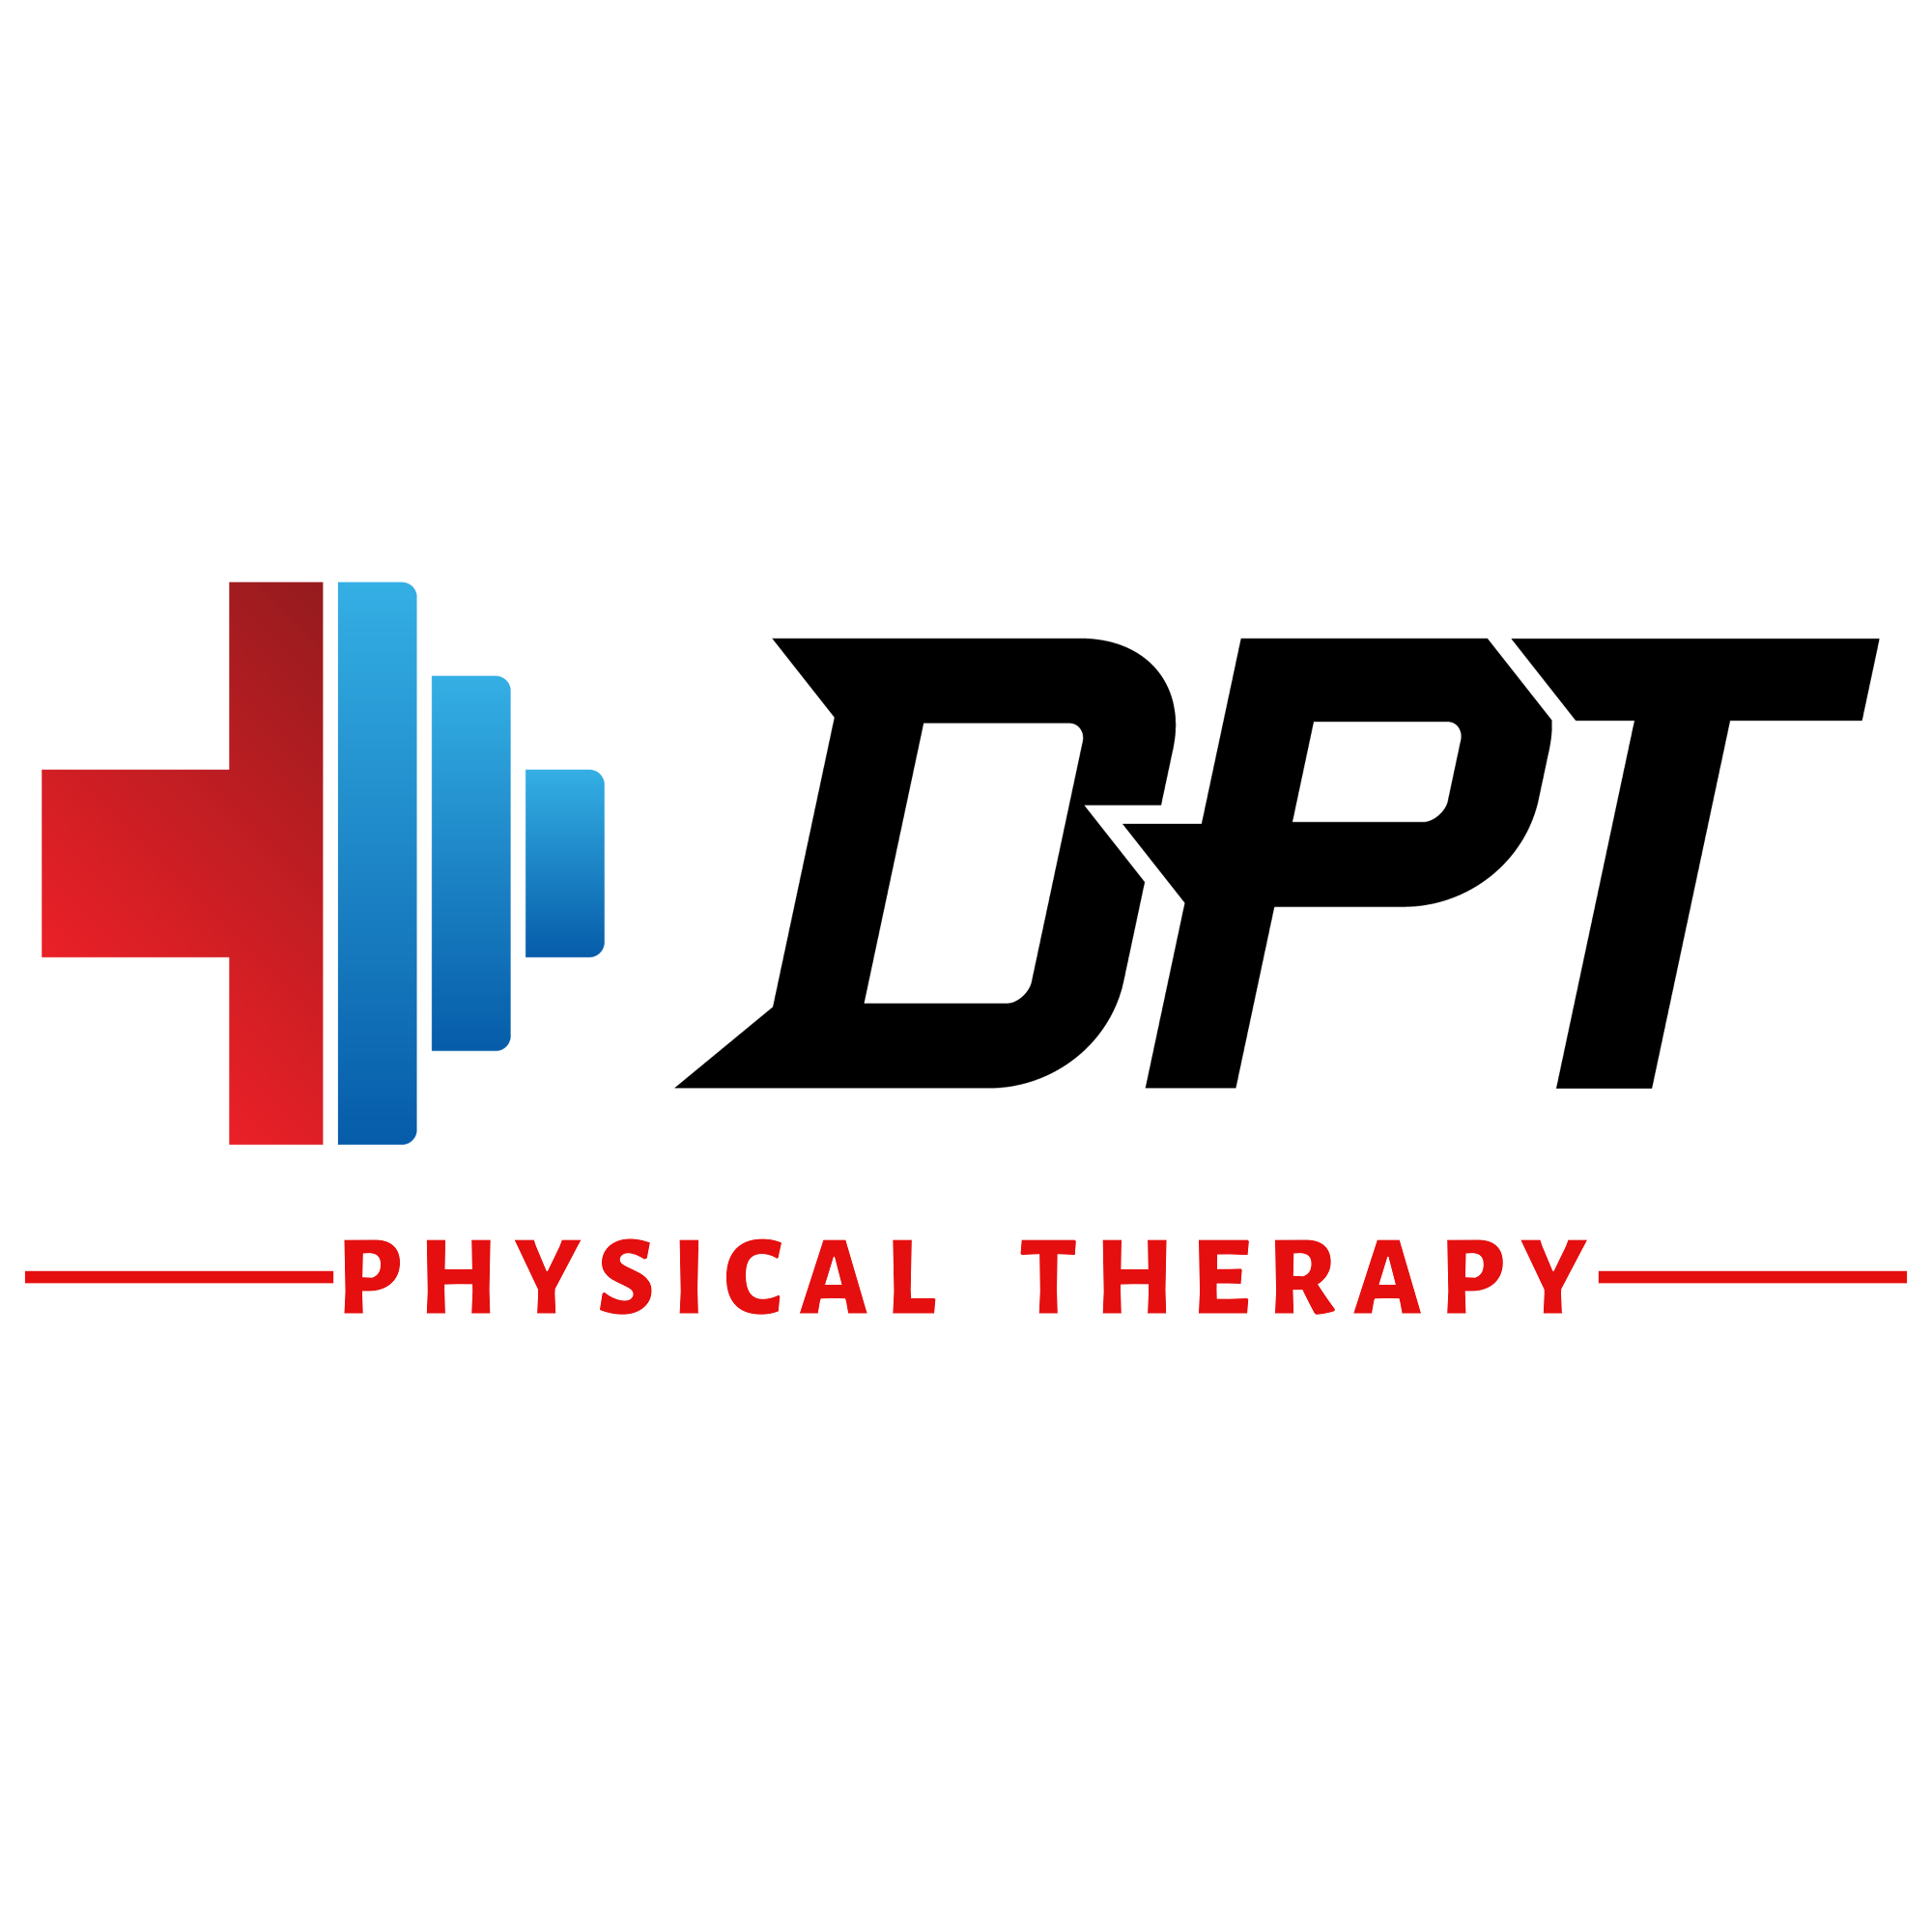 DPT Physical Therapy & Fitness - Bloomfield 2085 Franklin Rd #B, Bloomfield Michigan 48302